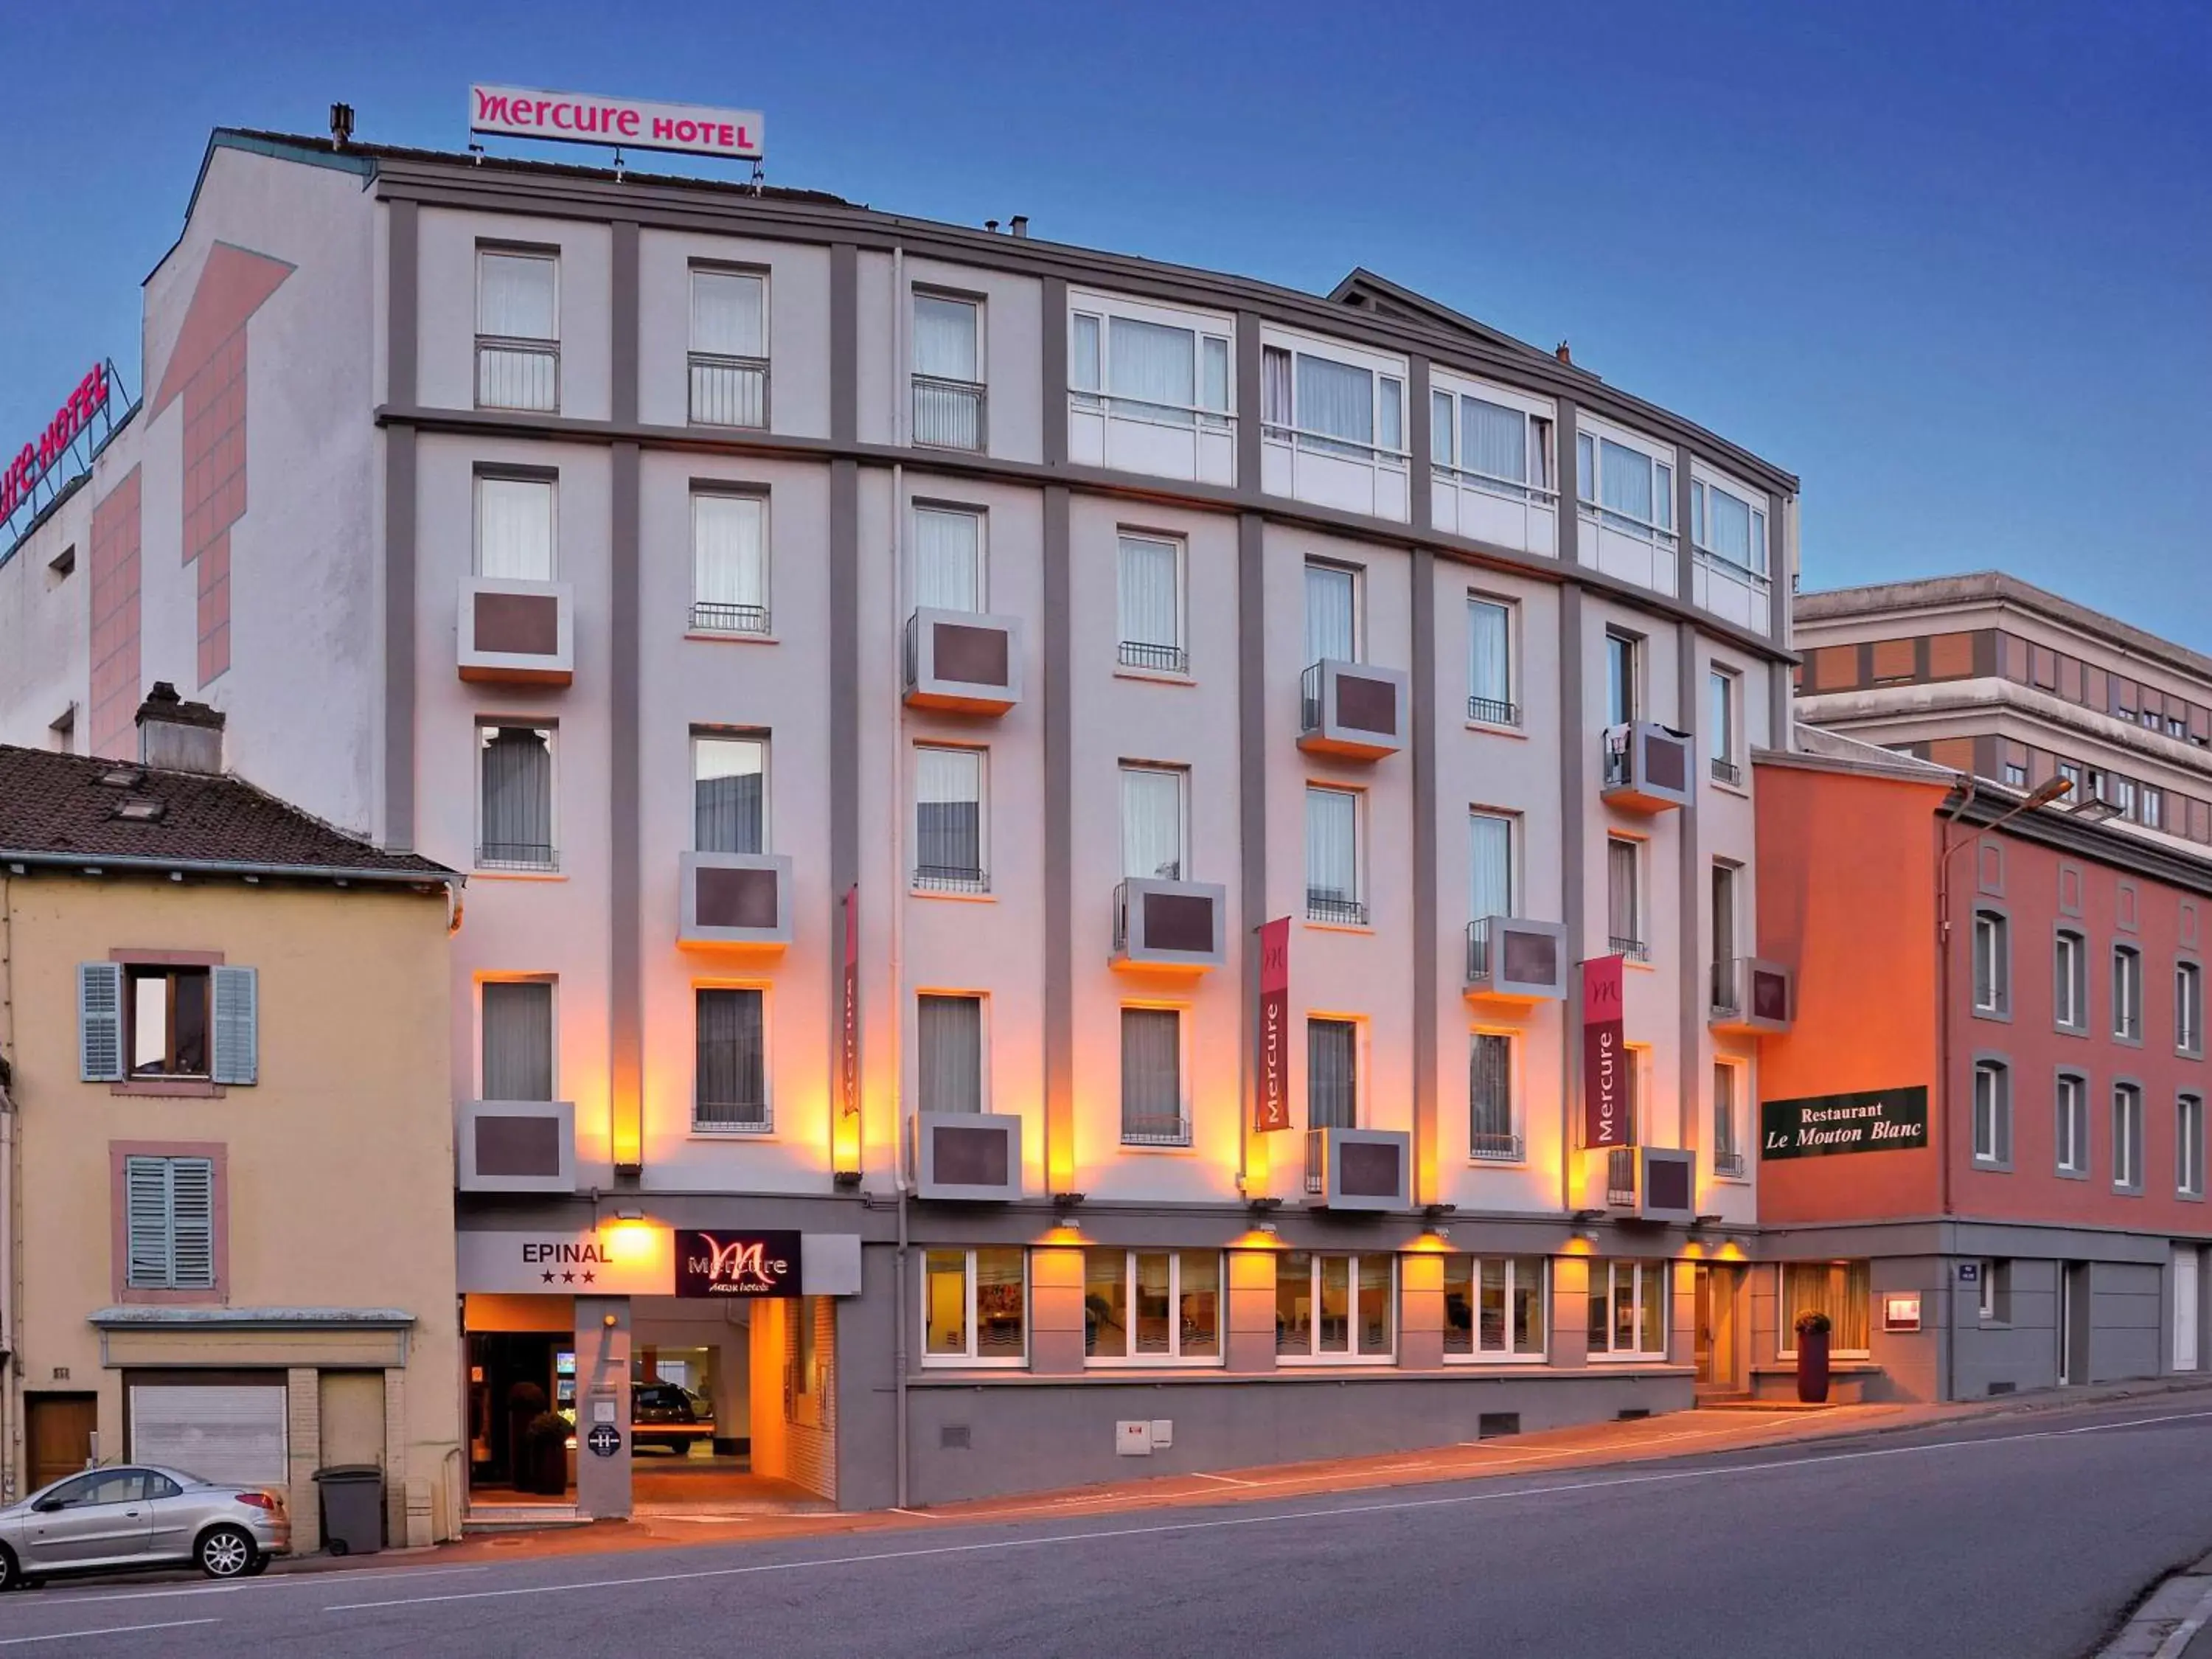 Property building in Mercure Epinal Centre